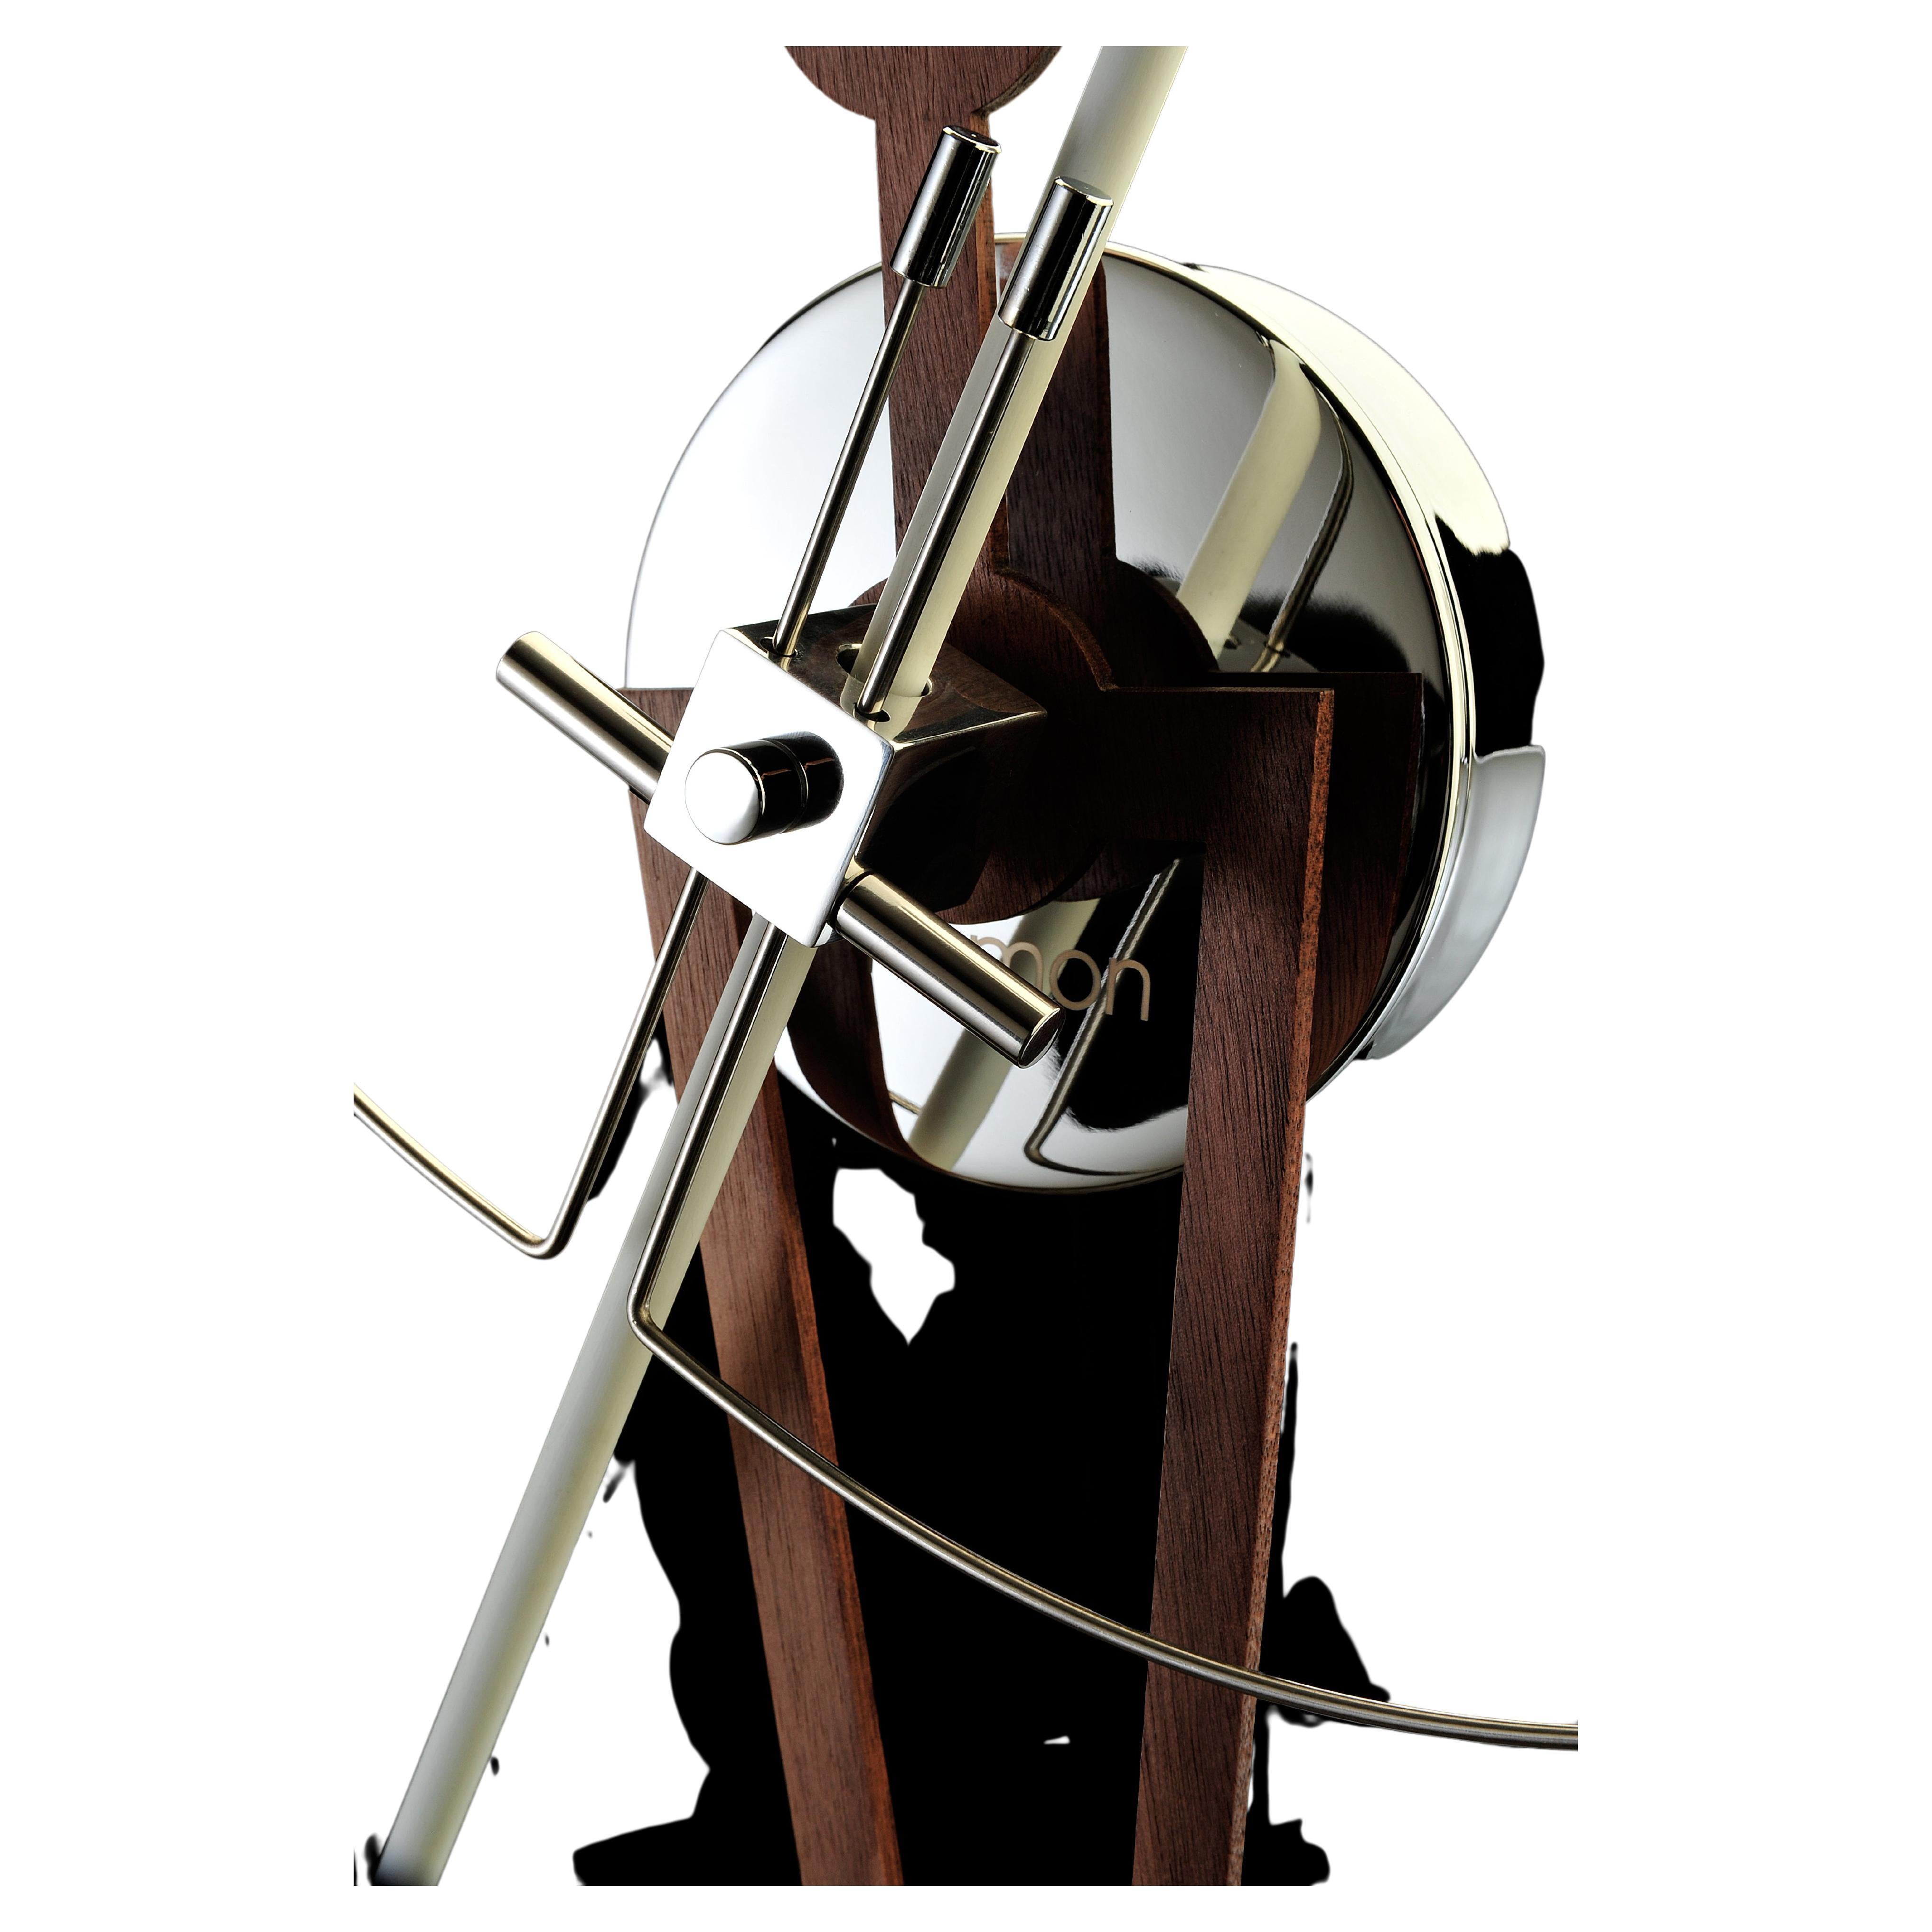 
Ø80cm clock composed of a walnut wood hour hand and a fiberglass minute hand on top of a metal ring. Contemporary design and great visual impact.

Chromed metal details, white fiberglass minute hand with walnut details. (Chris N)
Polished brass